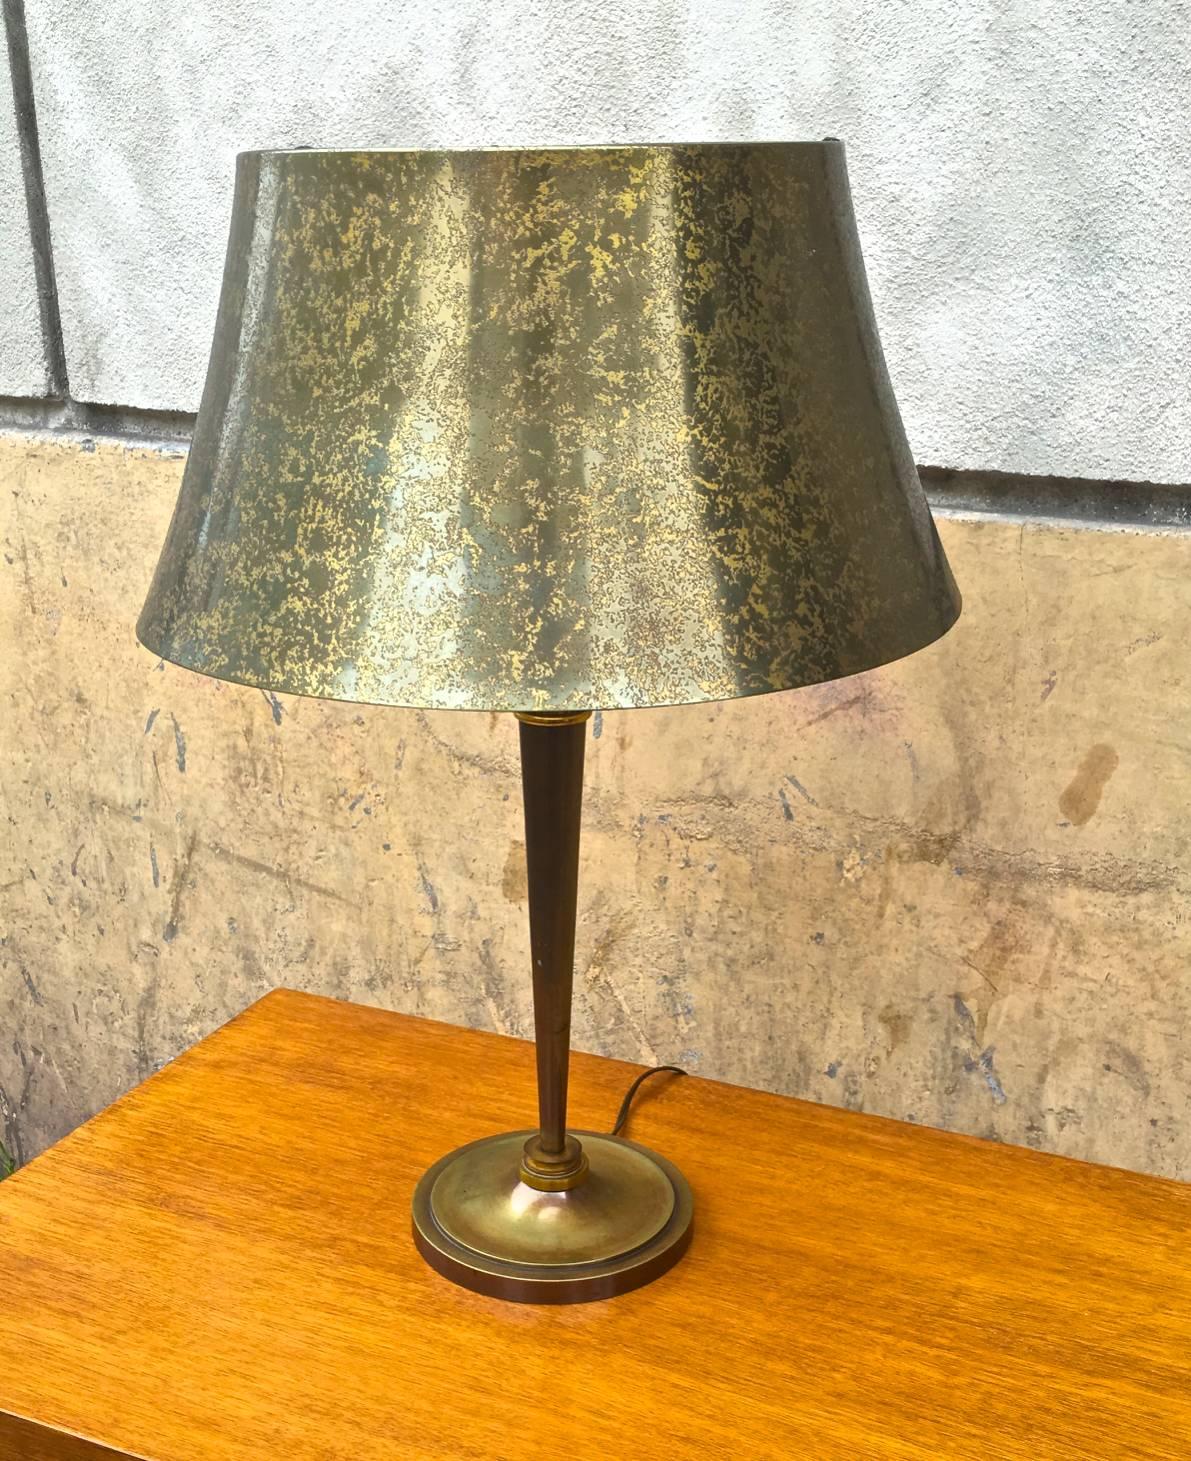 Genet Michon Superb Quality Gold Bronze Desk Lamp with Acid Engraved Shade For Sale 1